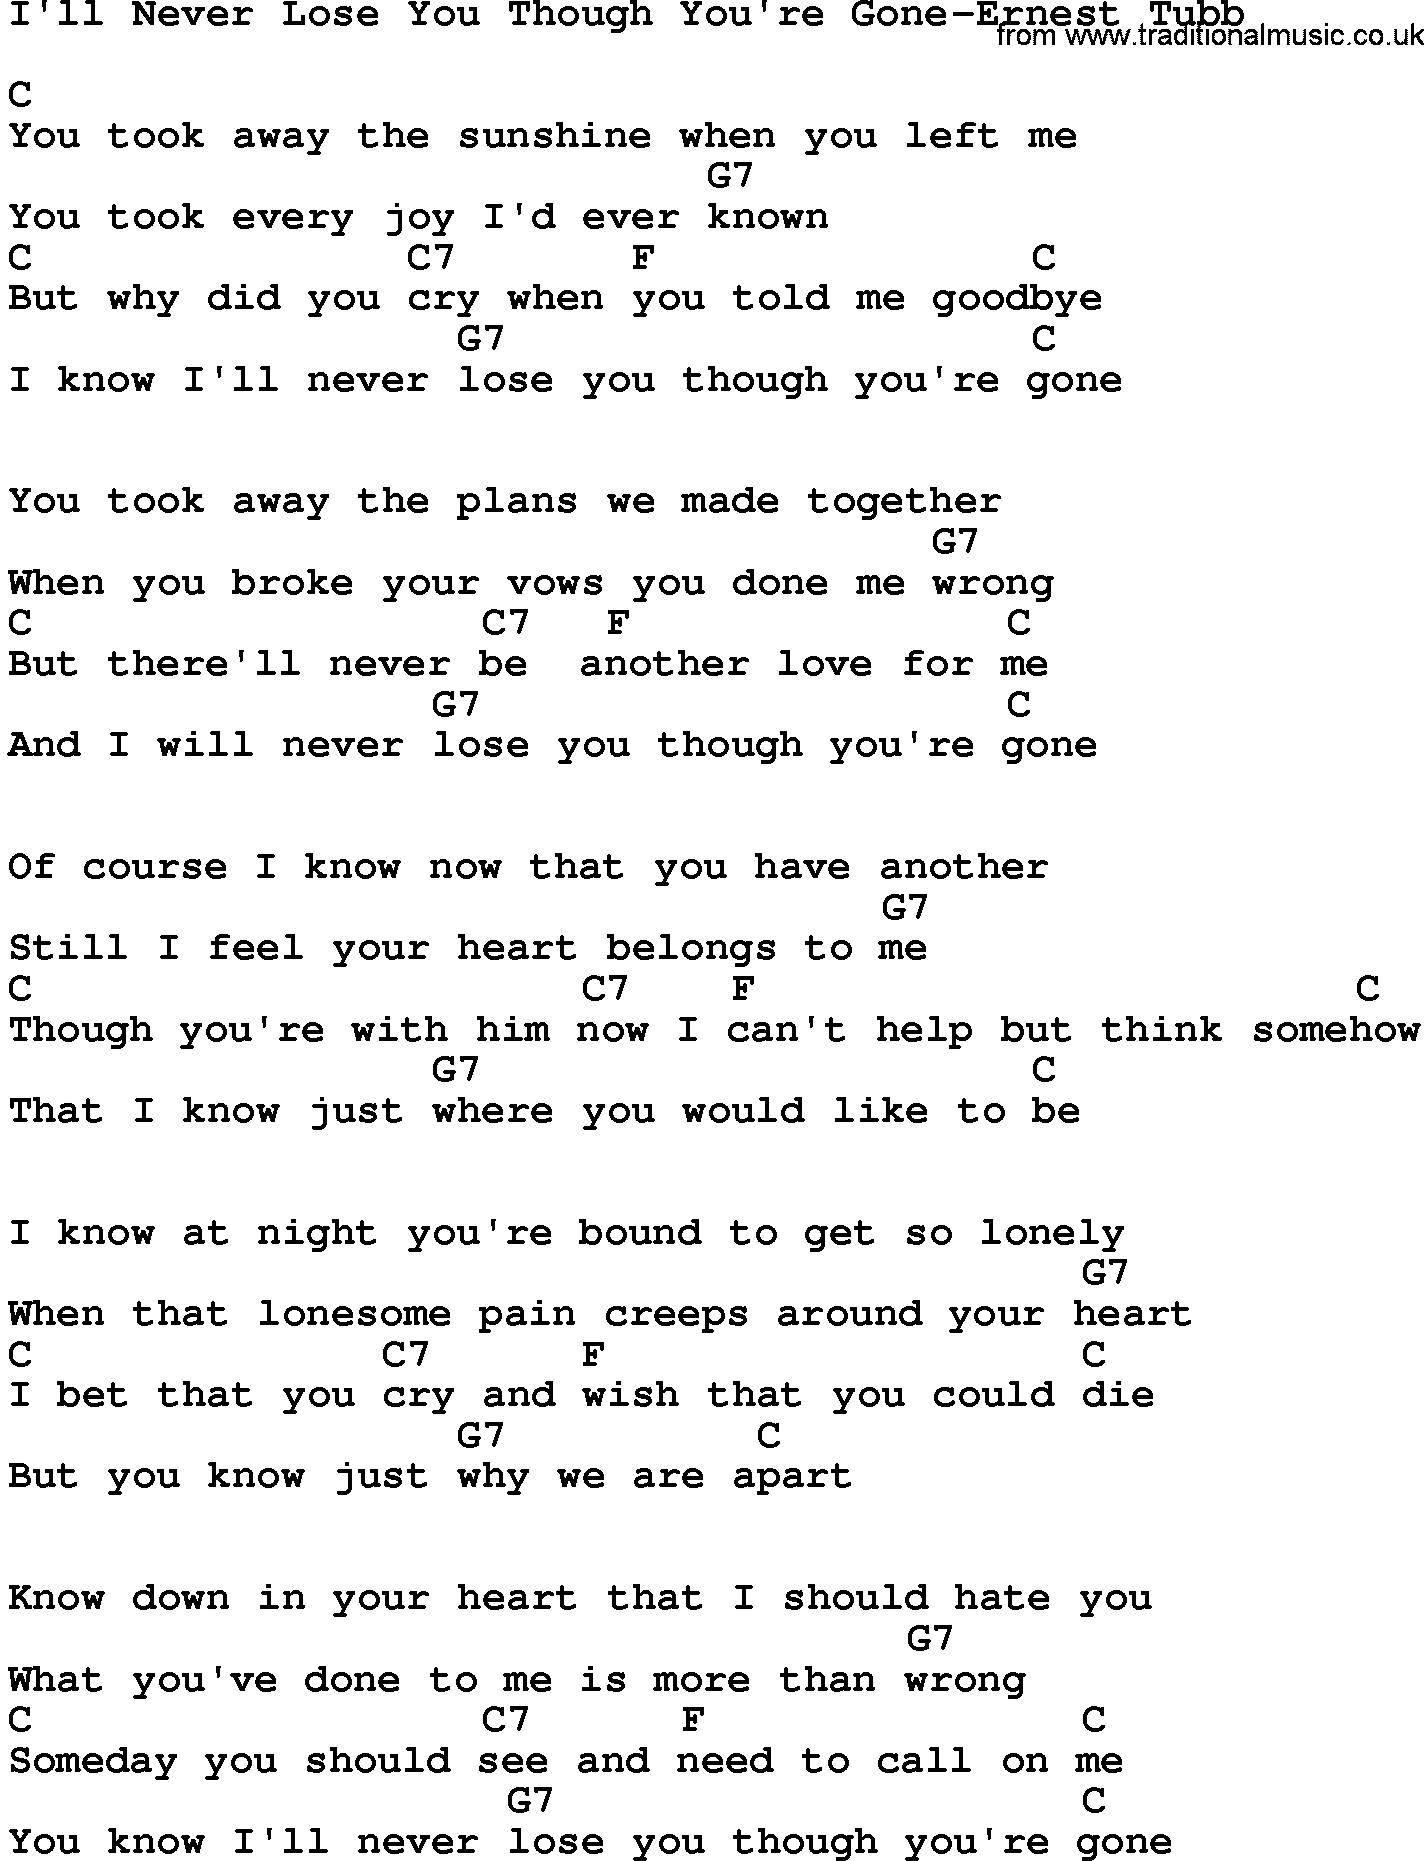 Country music song: I'll Never Lose You Though You're Gone-Ernest Tubb lyrics and chords